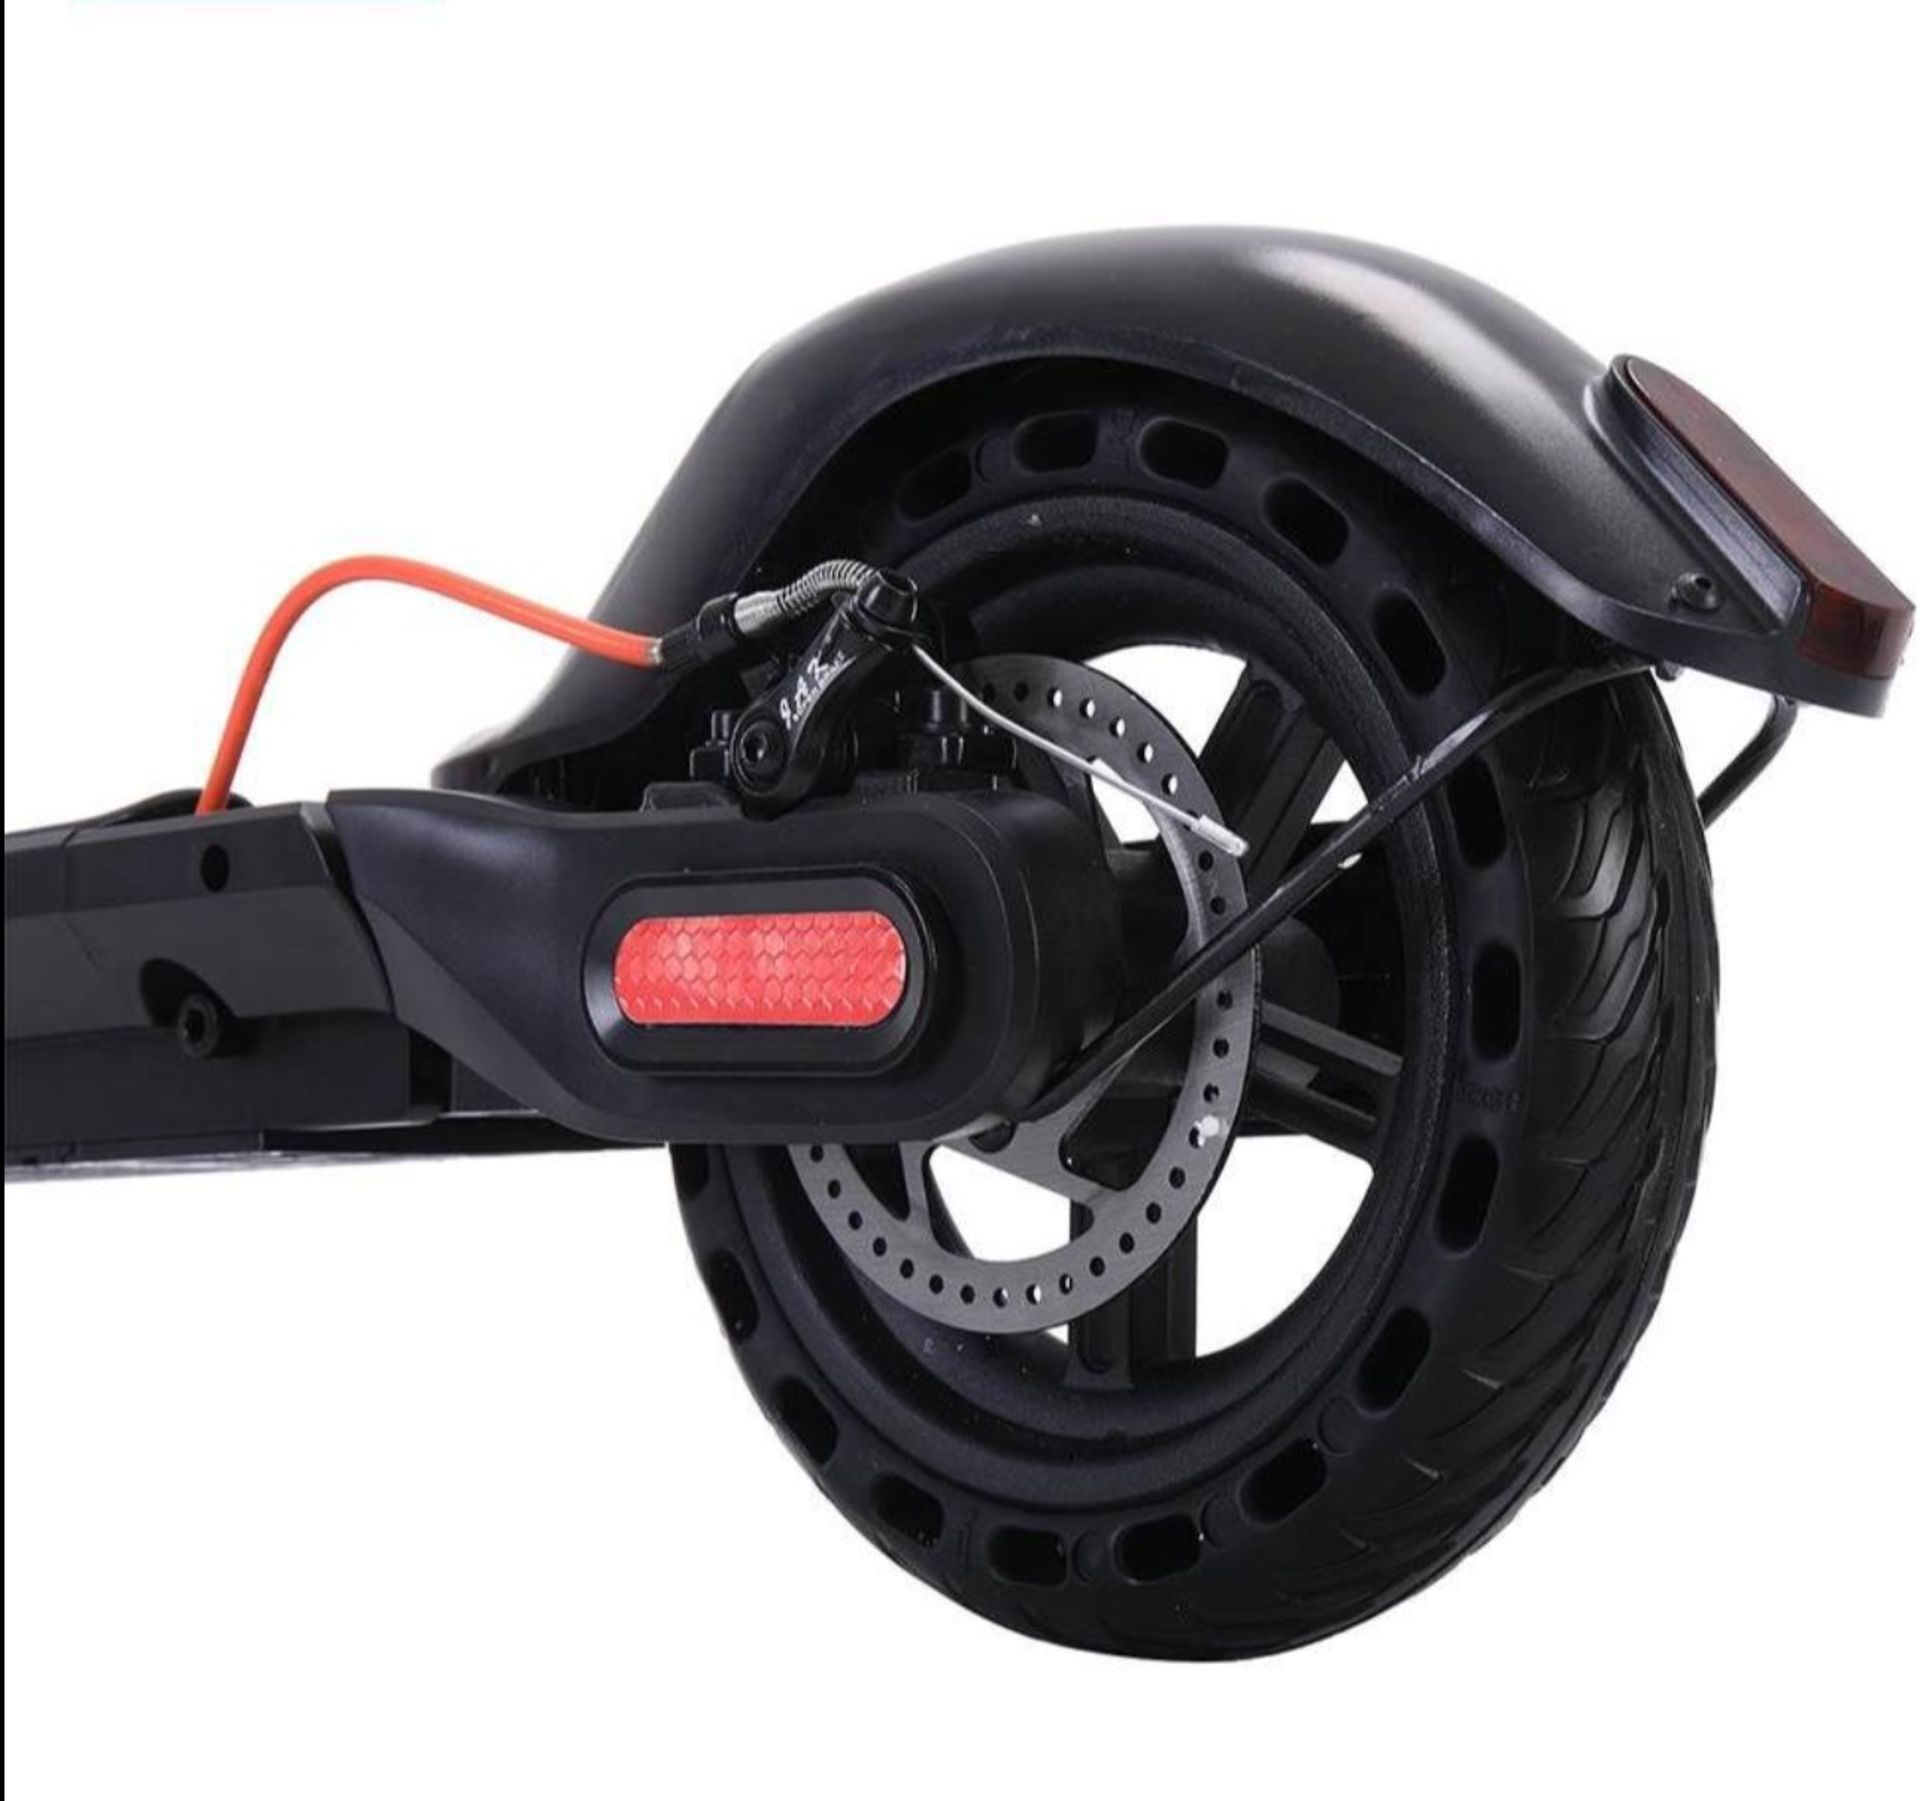 Brand New Gravity M5-1 Pro Electric Scooter 8.5 Inch Foldable Adult E-Scooter RRP £349 - Image 4 of 4